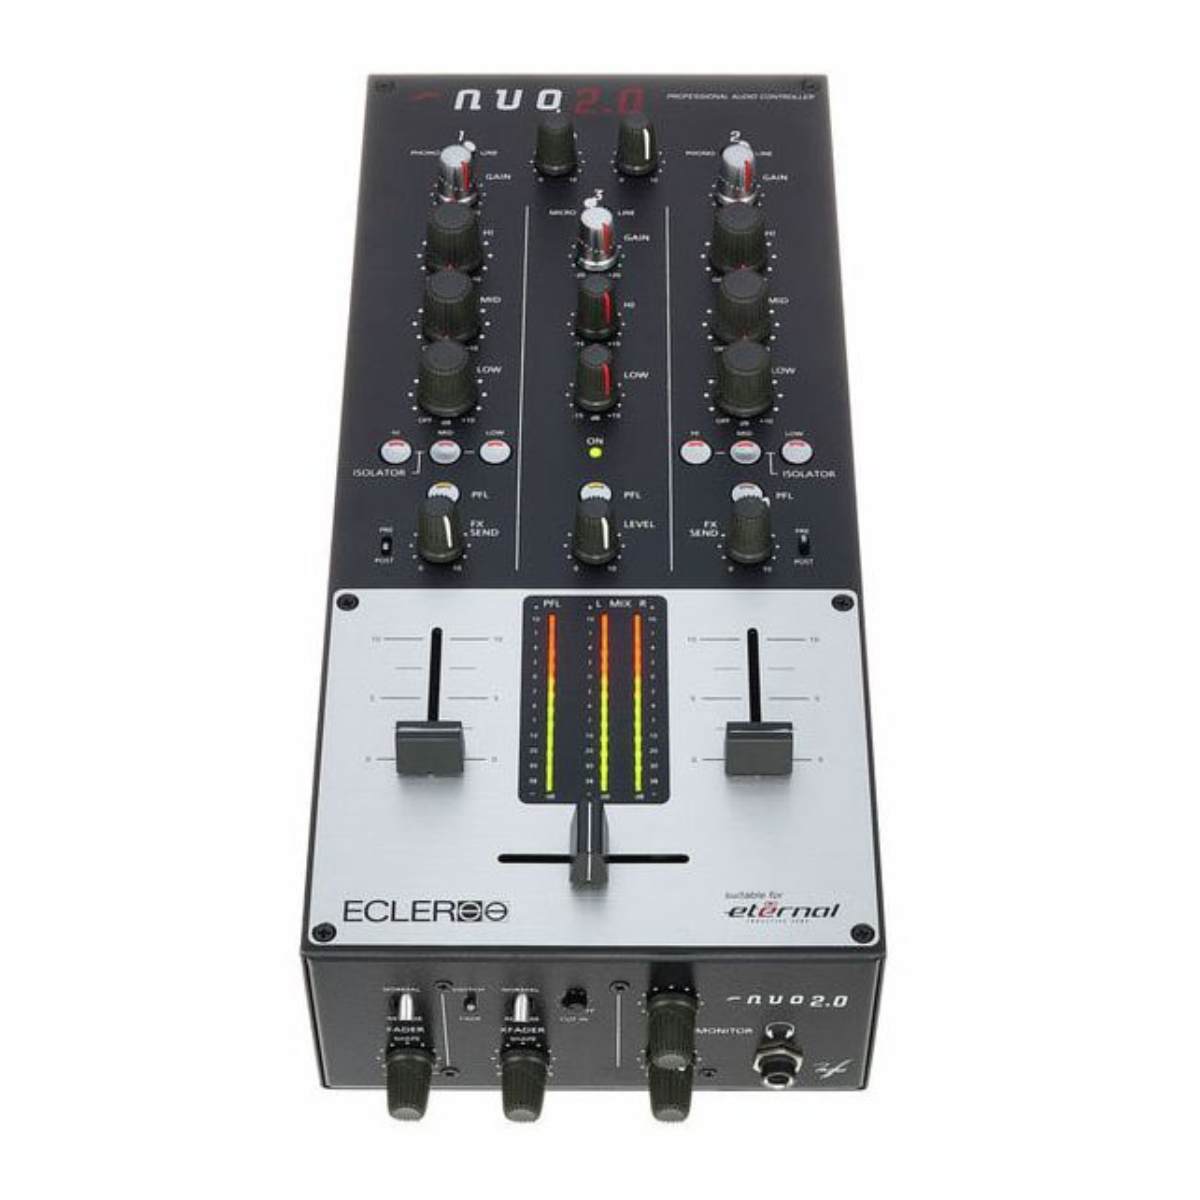 Ecler NUO 2.0 2-Channel Analogue DJ Mixer